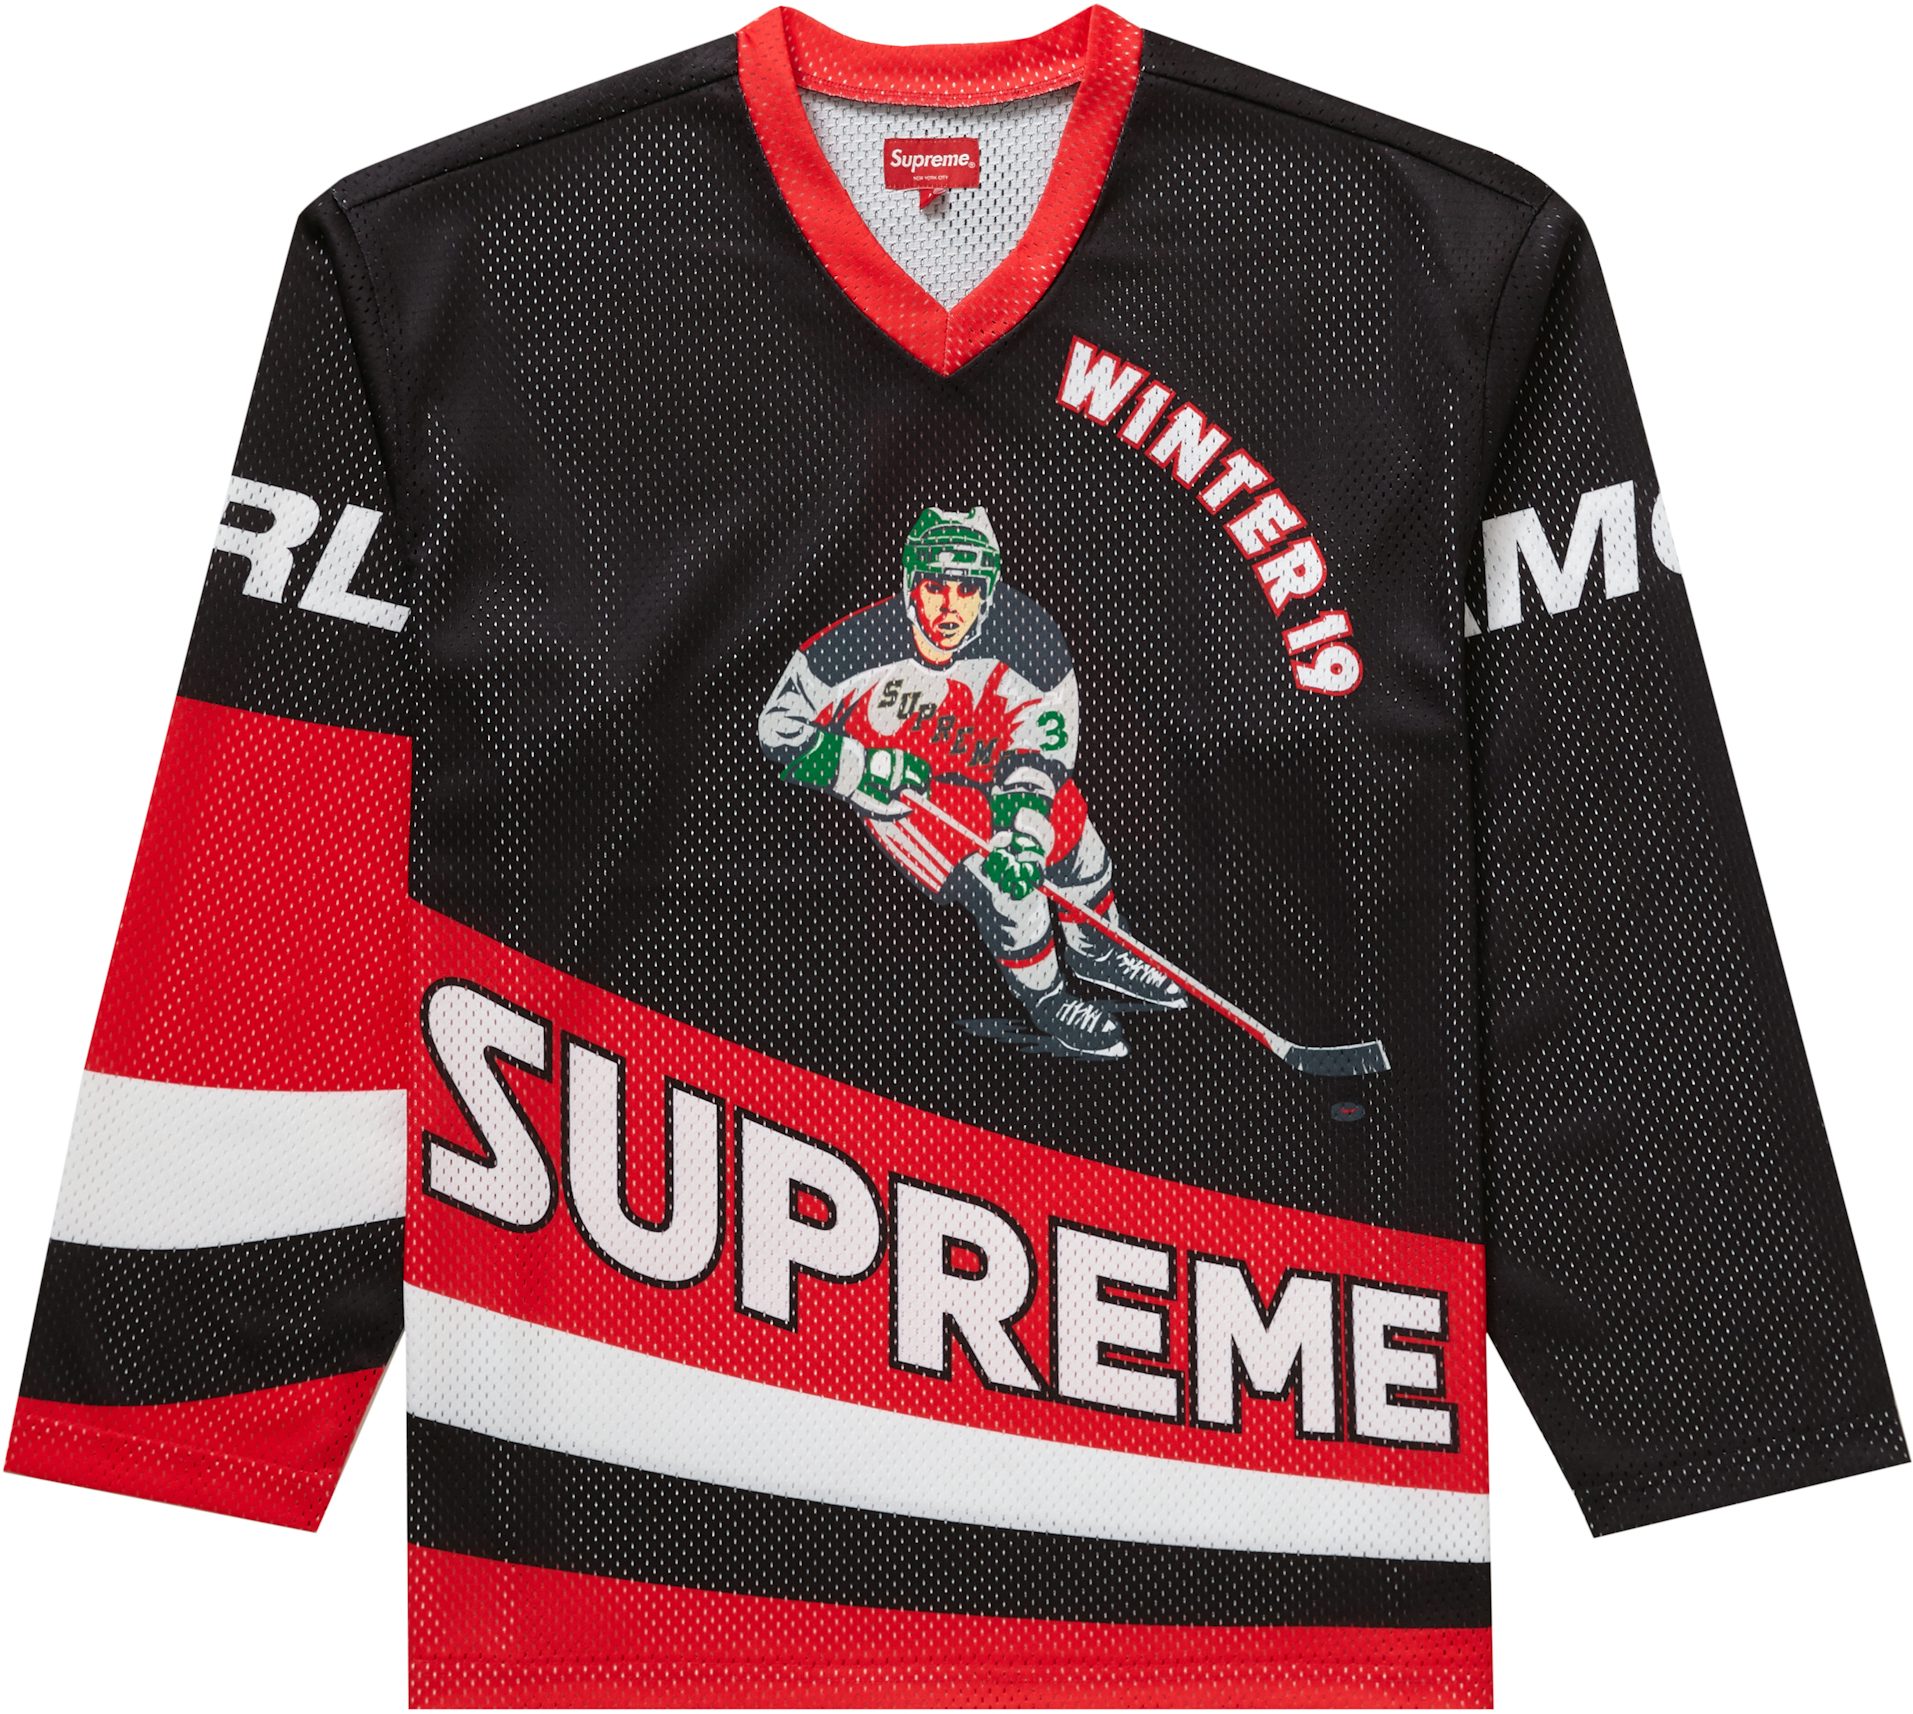 5 Best Places to Buy Hockey Jerseys (with Insider Tips)